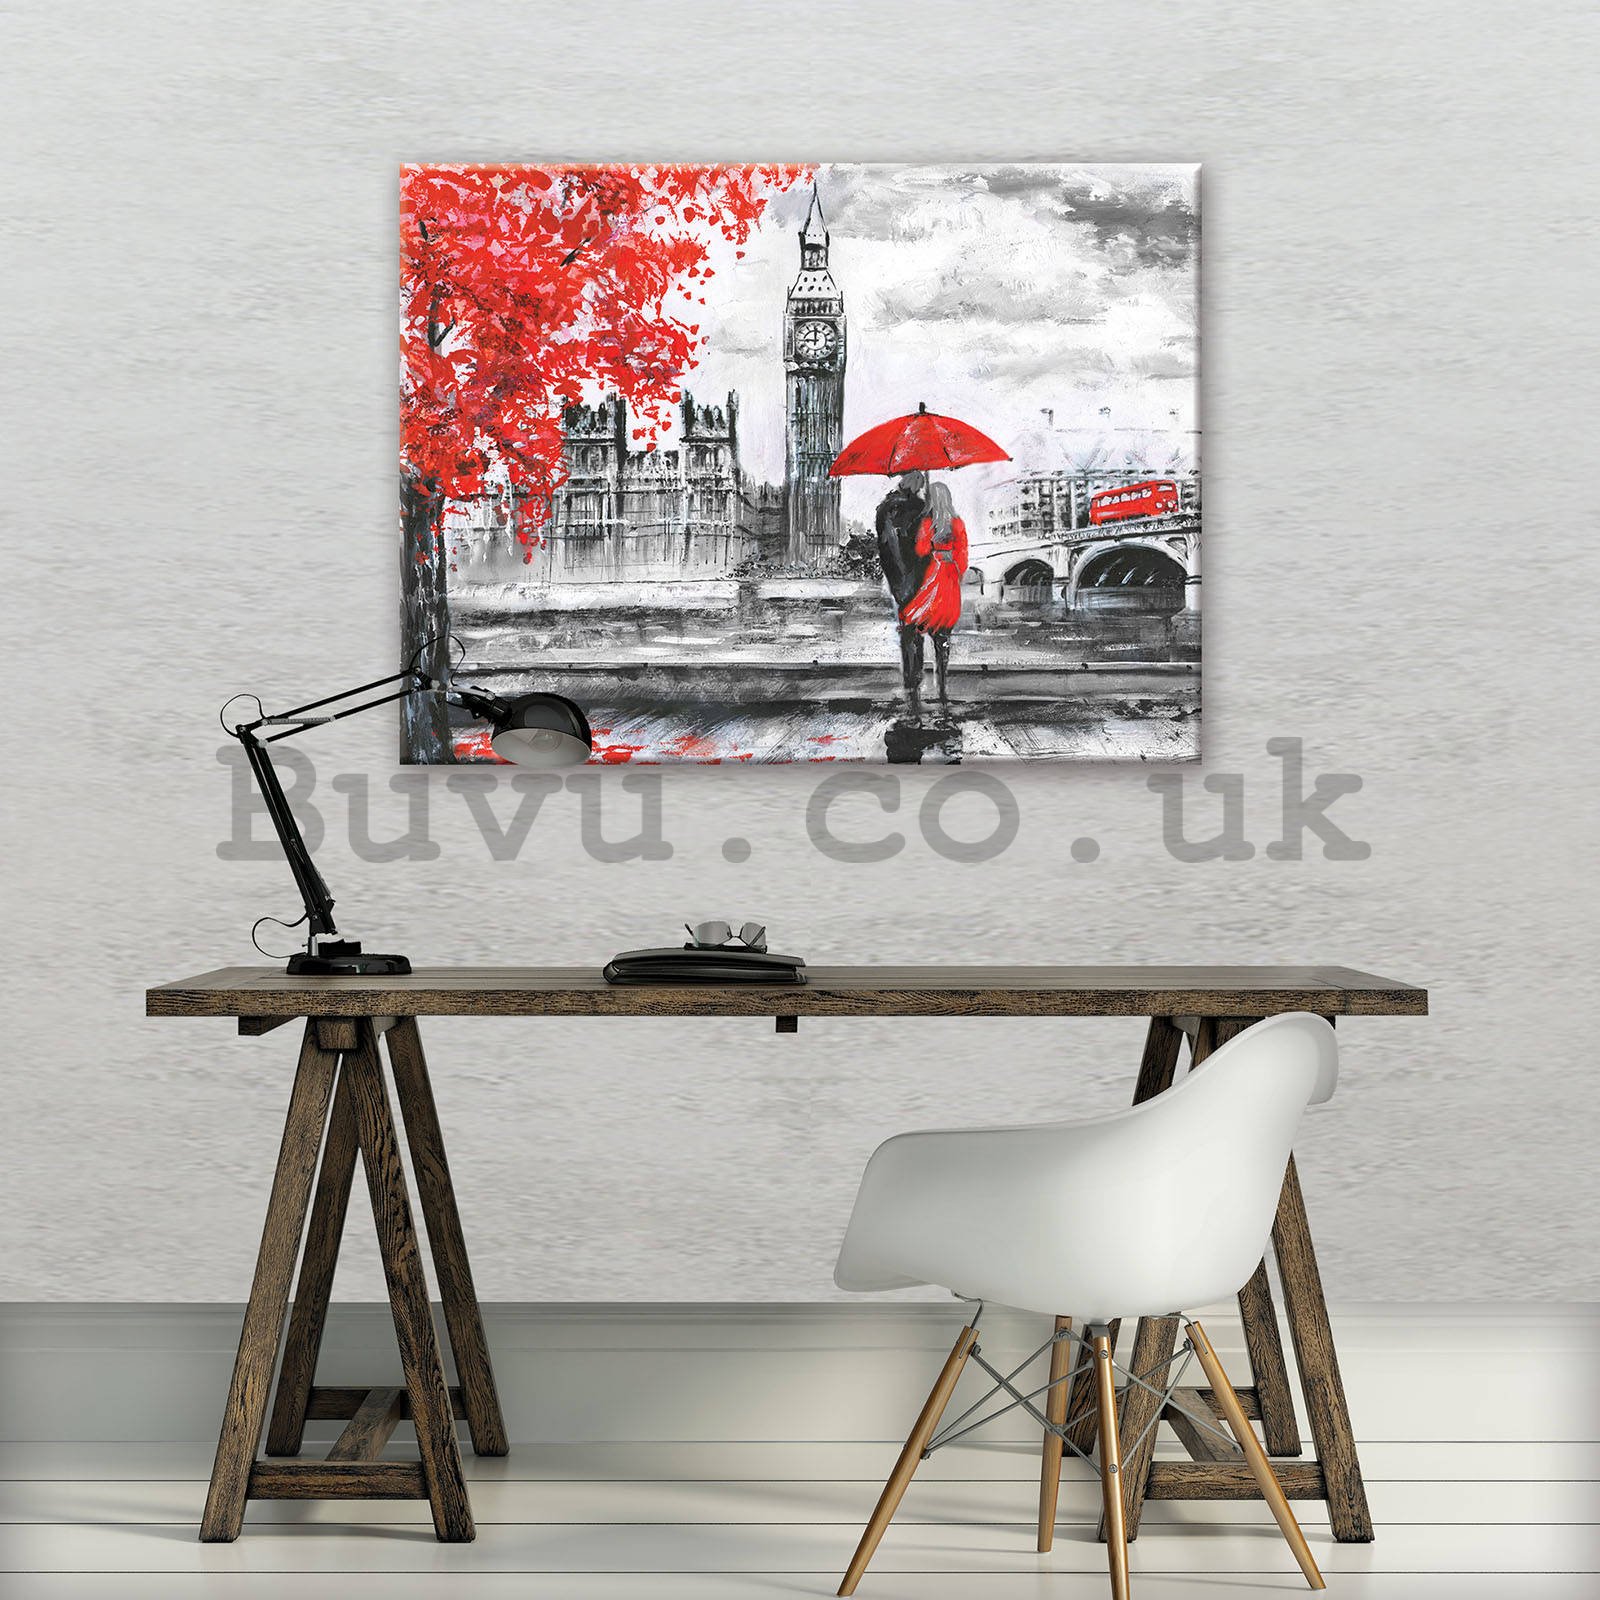 Painting on canvas: London (painted) - 80x60 cm